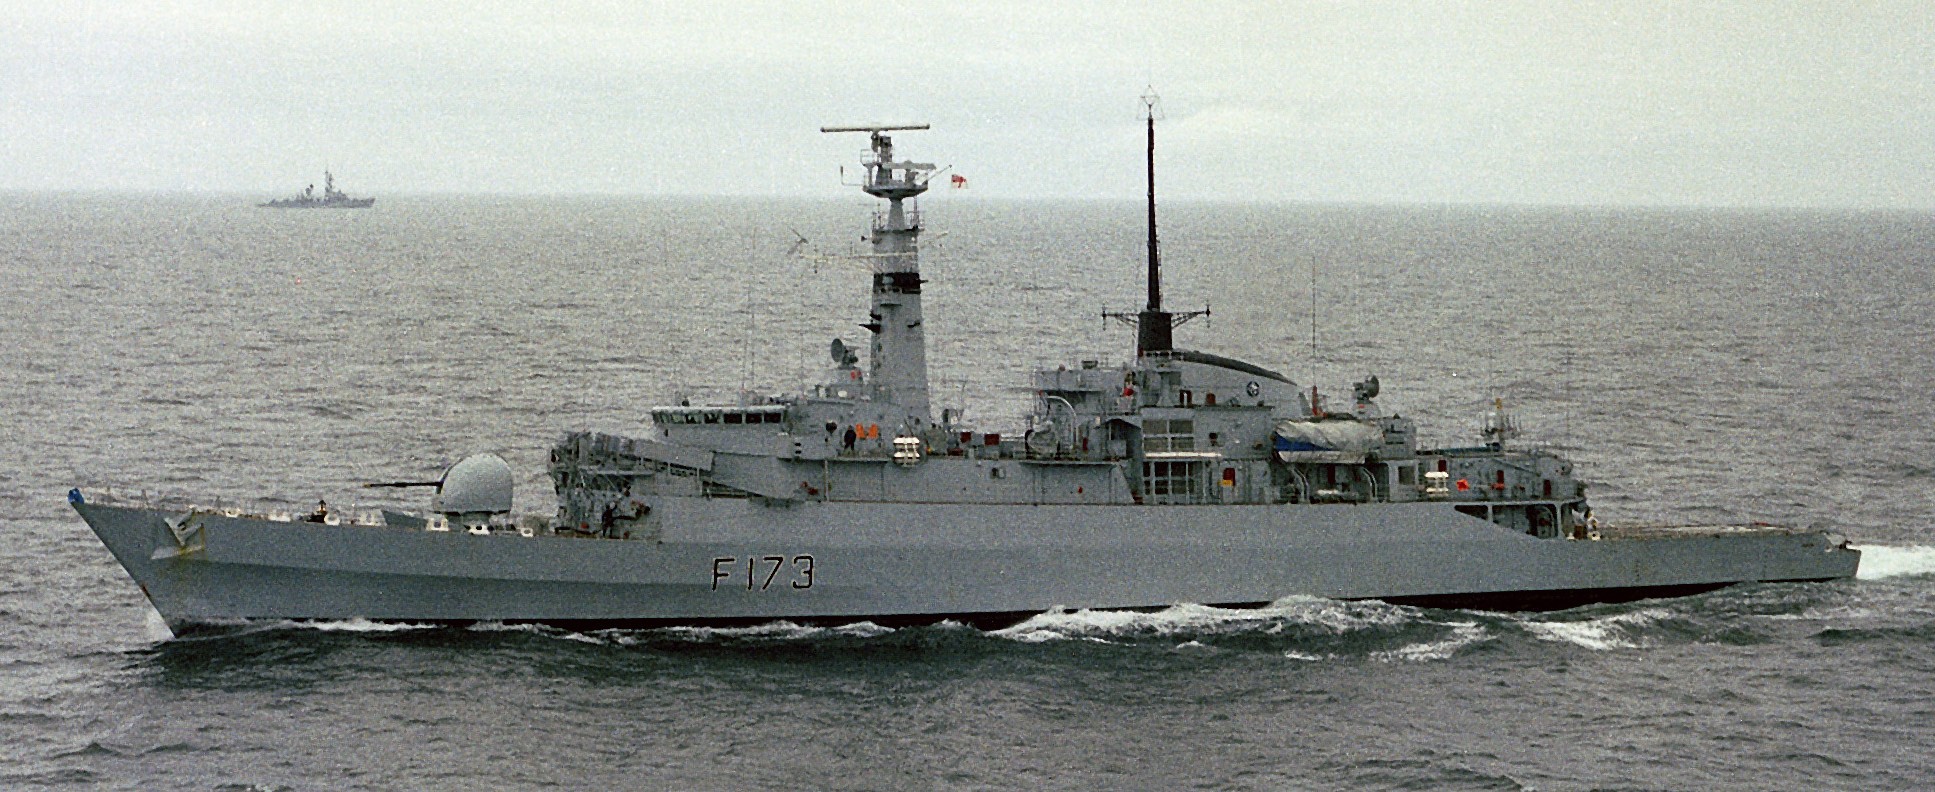 amazon type 21 class guided missile frigate royal navy seacat sam exocet ssm